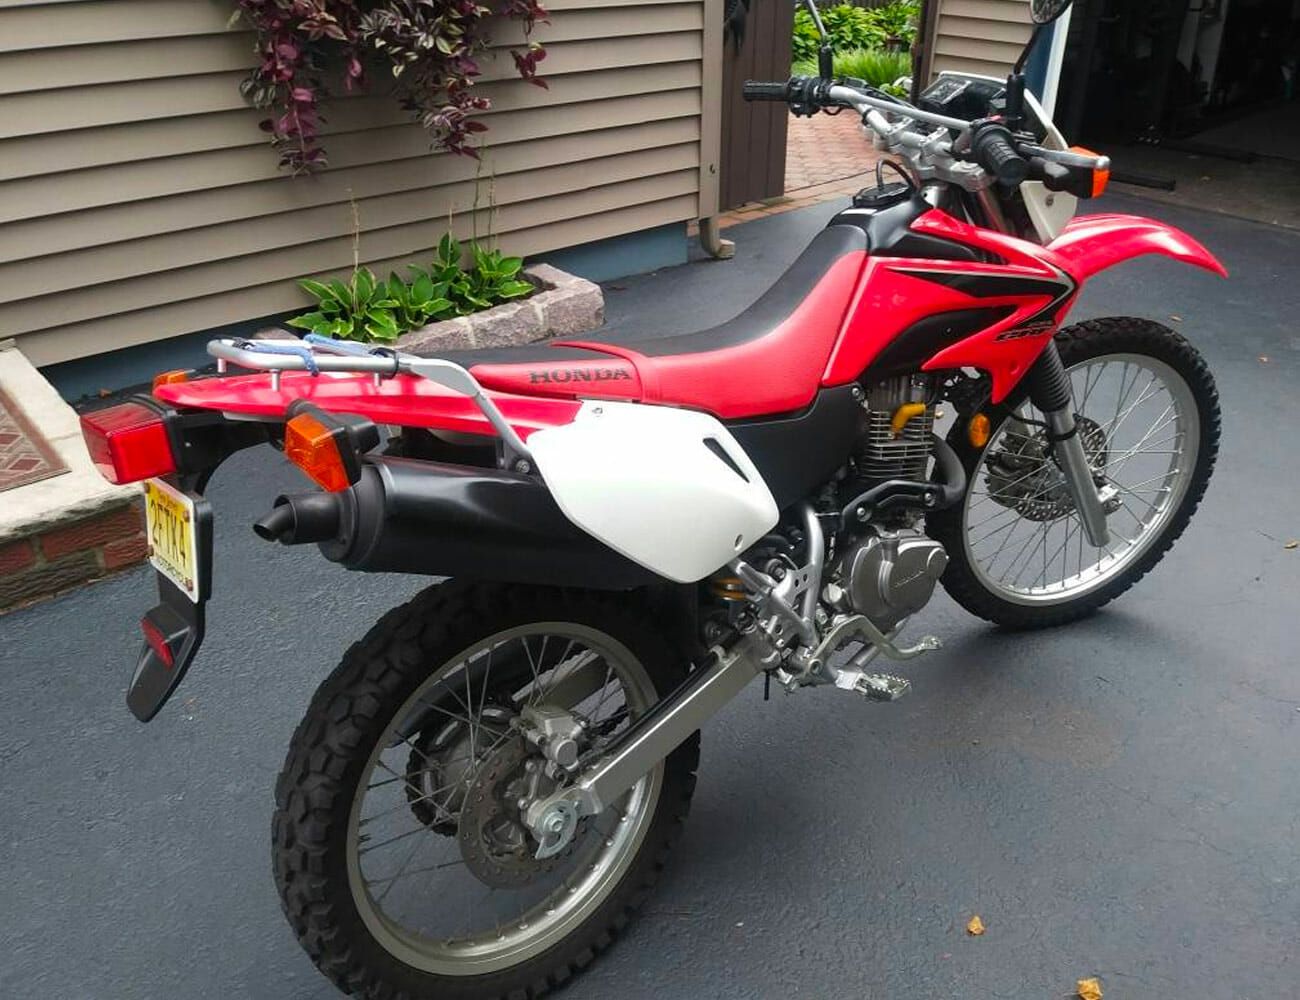 motorcycles for sale craigslist near me